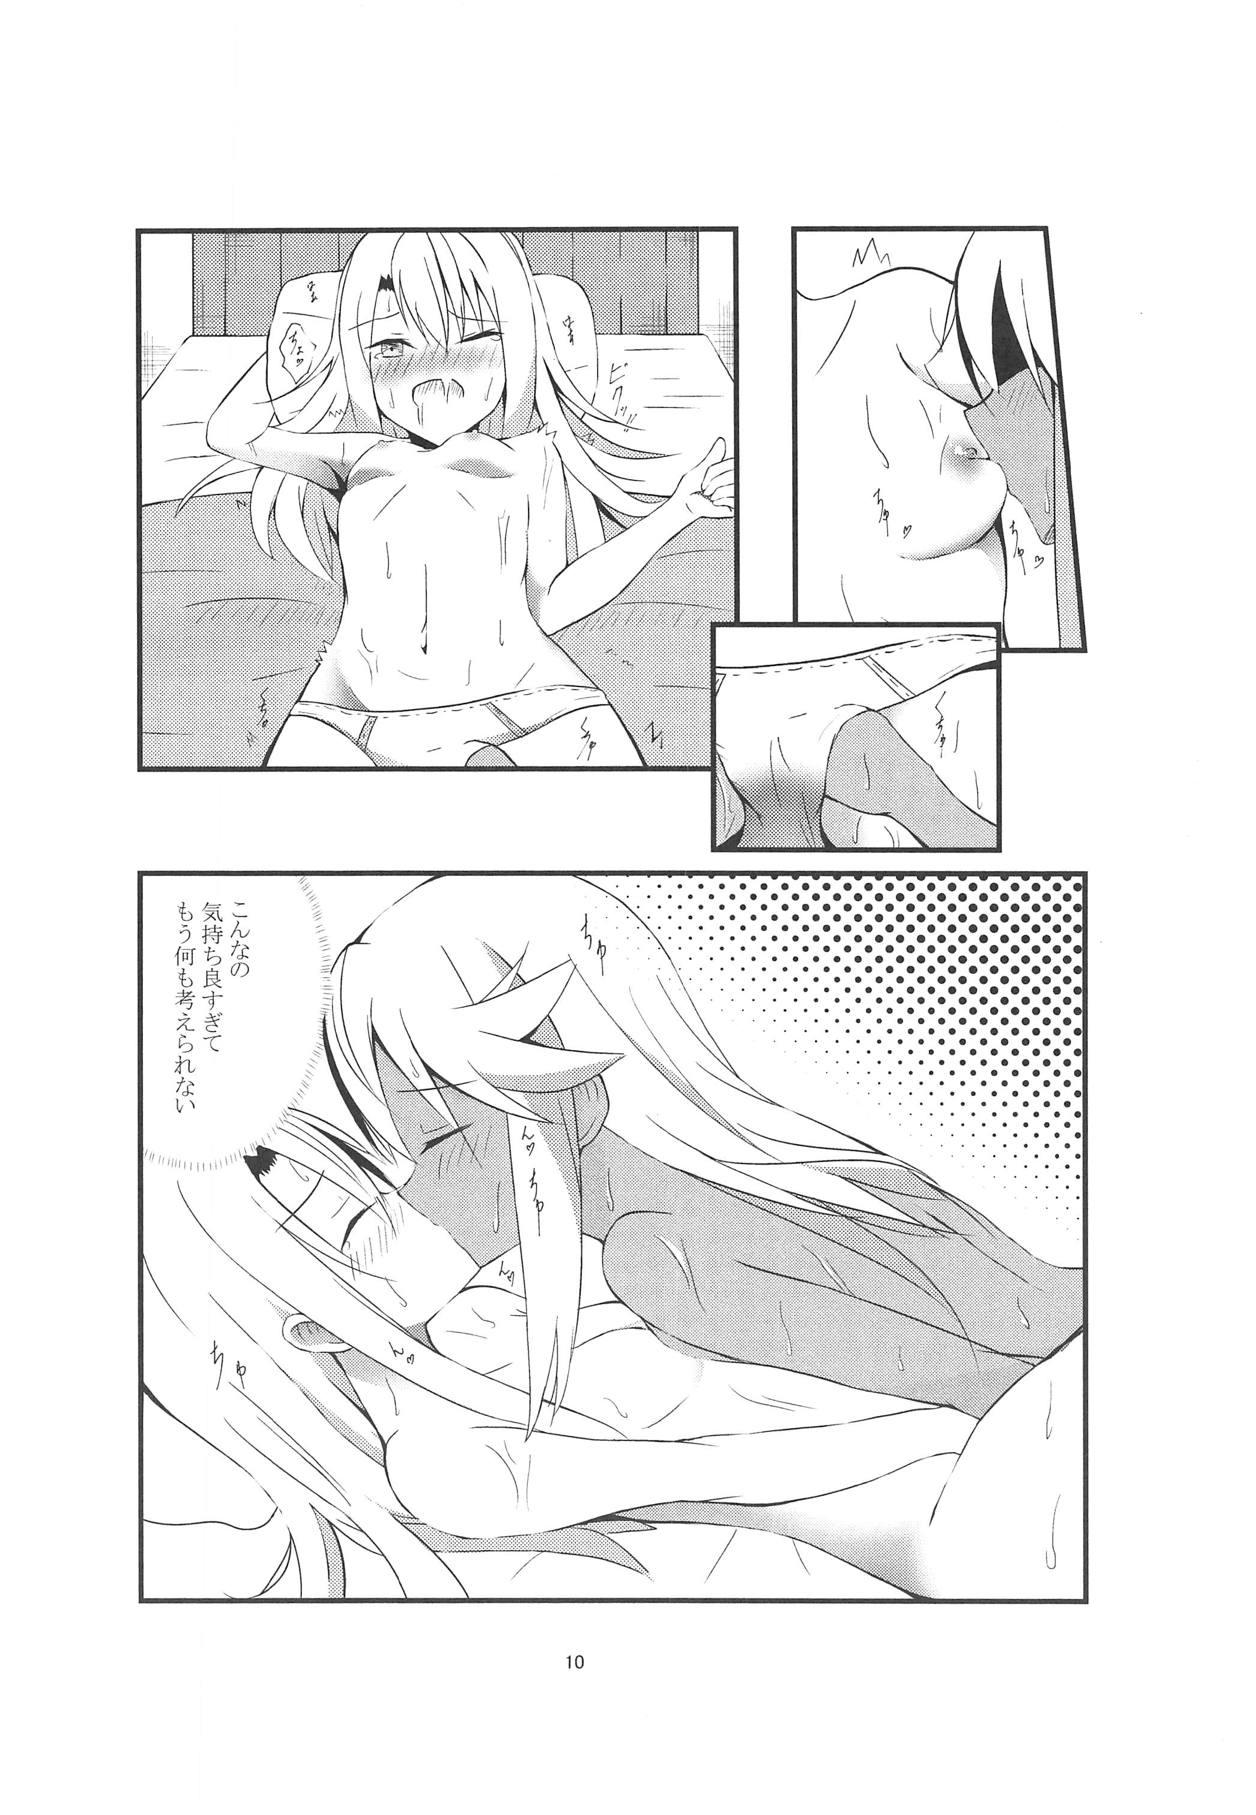 Wet Cunt Kiss Shite Power Up Daisakusen - Fate kaleid liner prisma illya Classic - Page 9